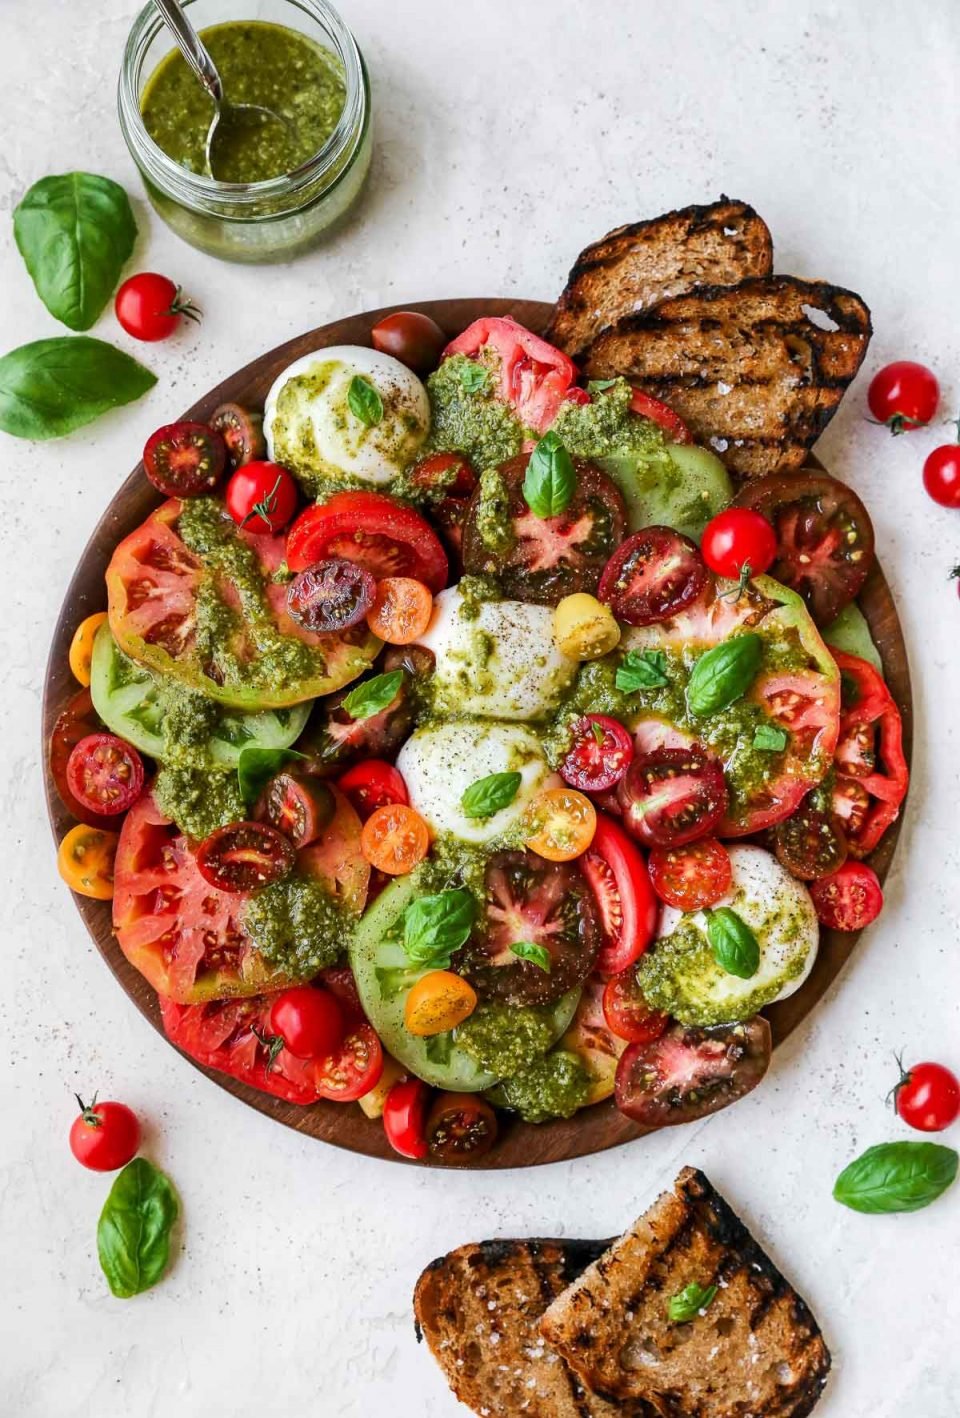 Heirloom tomato burrata salad arranged on a large wooden serving board, topped with vibrant green fresh pesto sauce. The board is surrounded by a few slices of grilled bread, fresh basil leaves, & a jar of pesto sauce atop a neutral background.